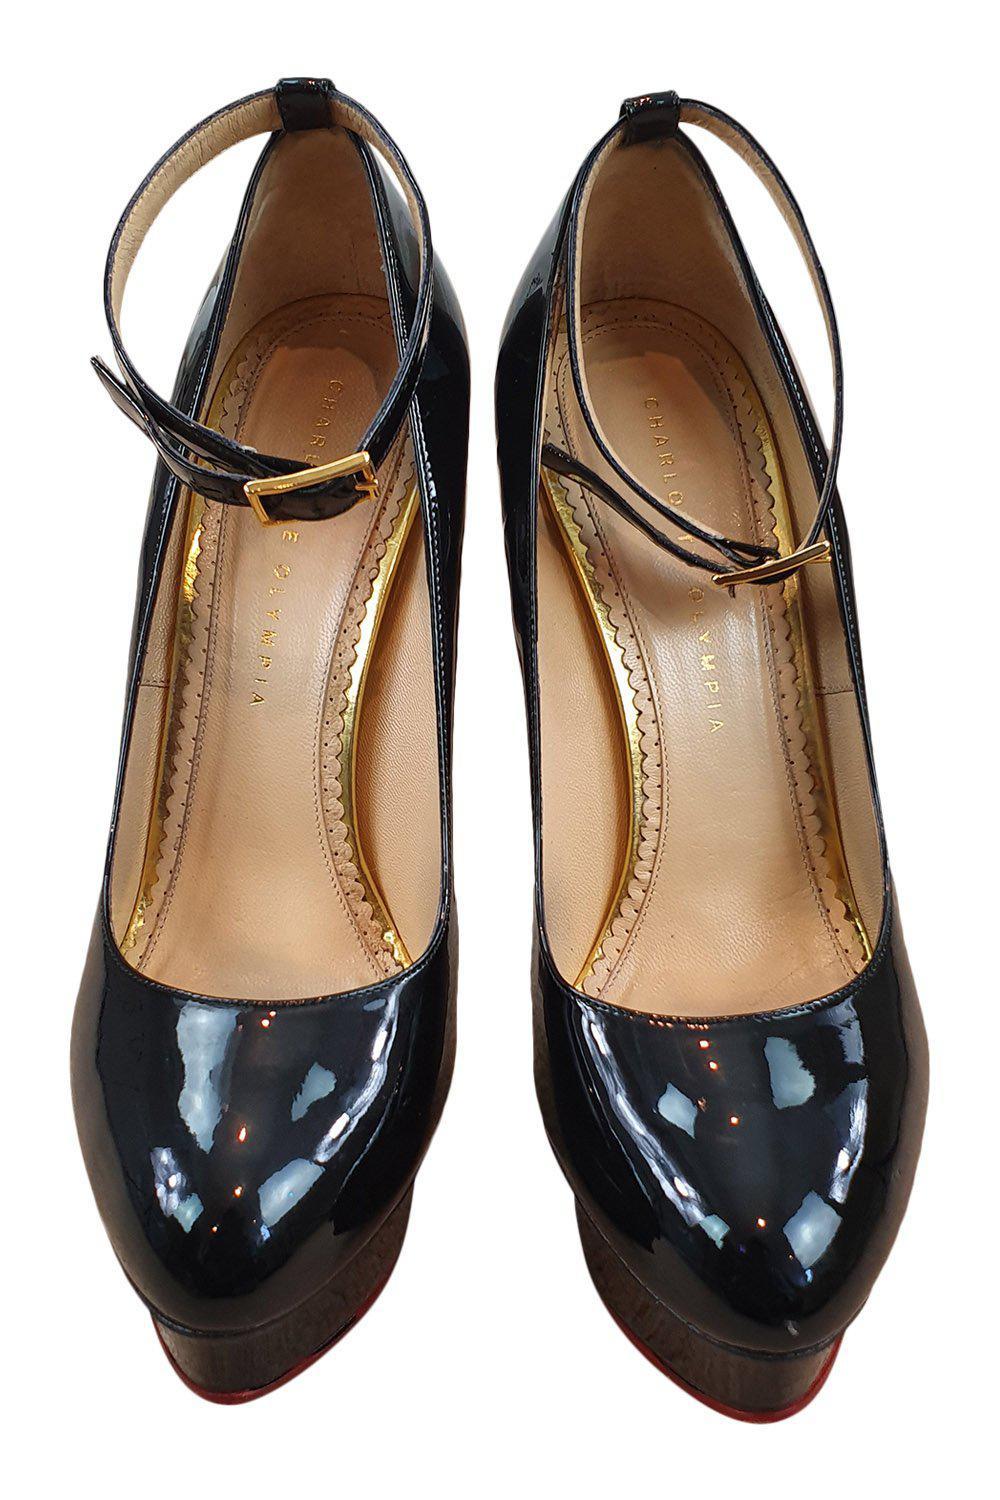 CHARLOTTE OLYMPIA Black Patent Leather Platform Stiletto Dolly Pumps (39.5)-Charlotte Olympia-The Freperie